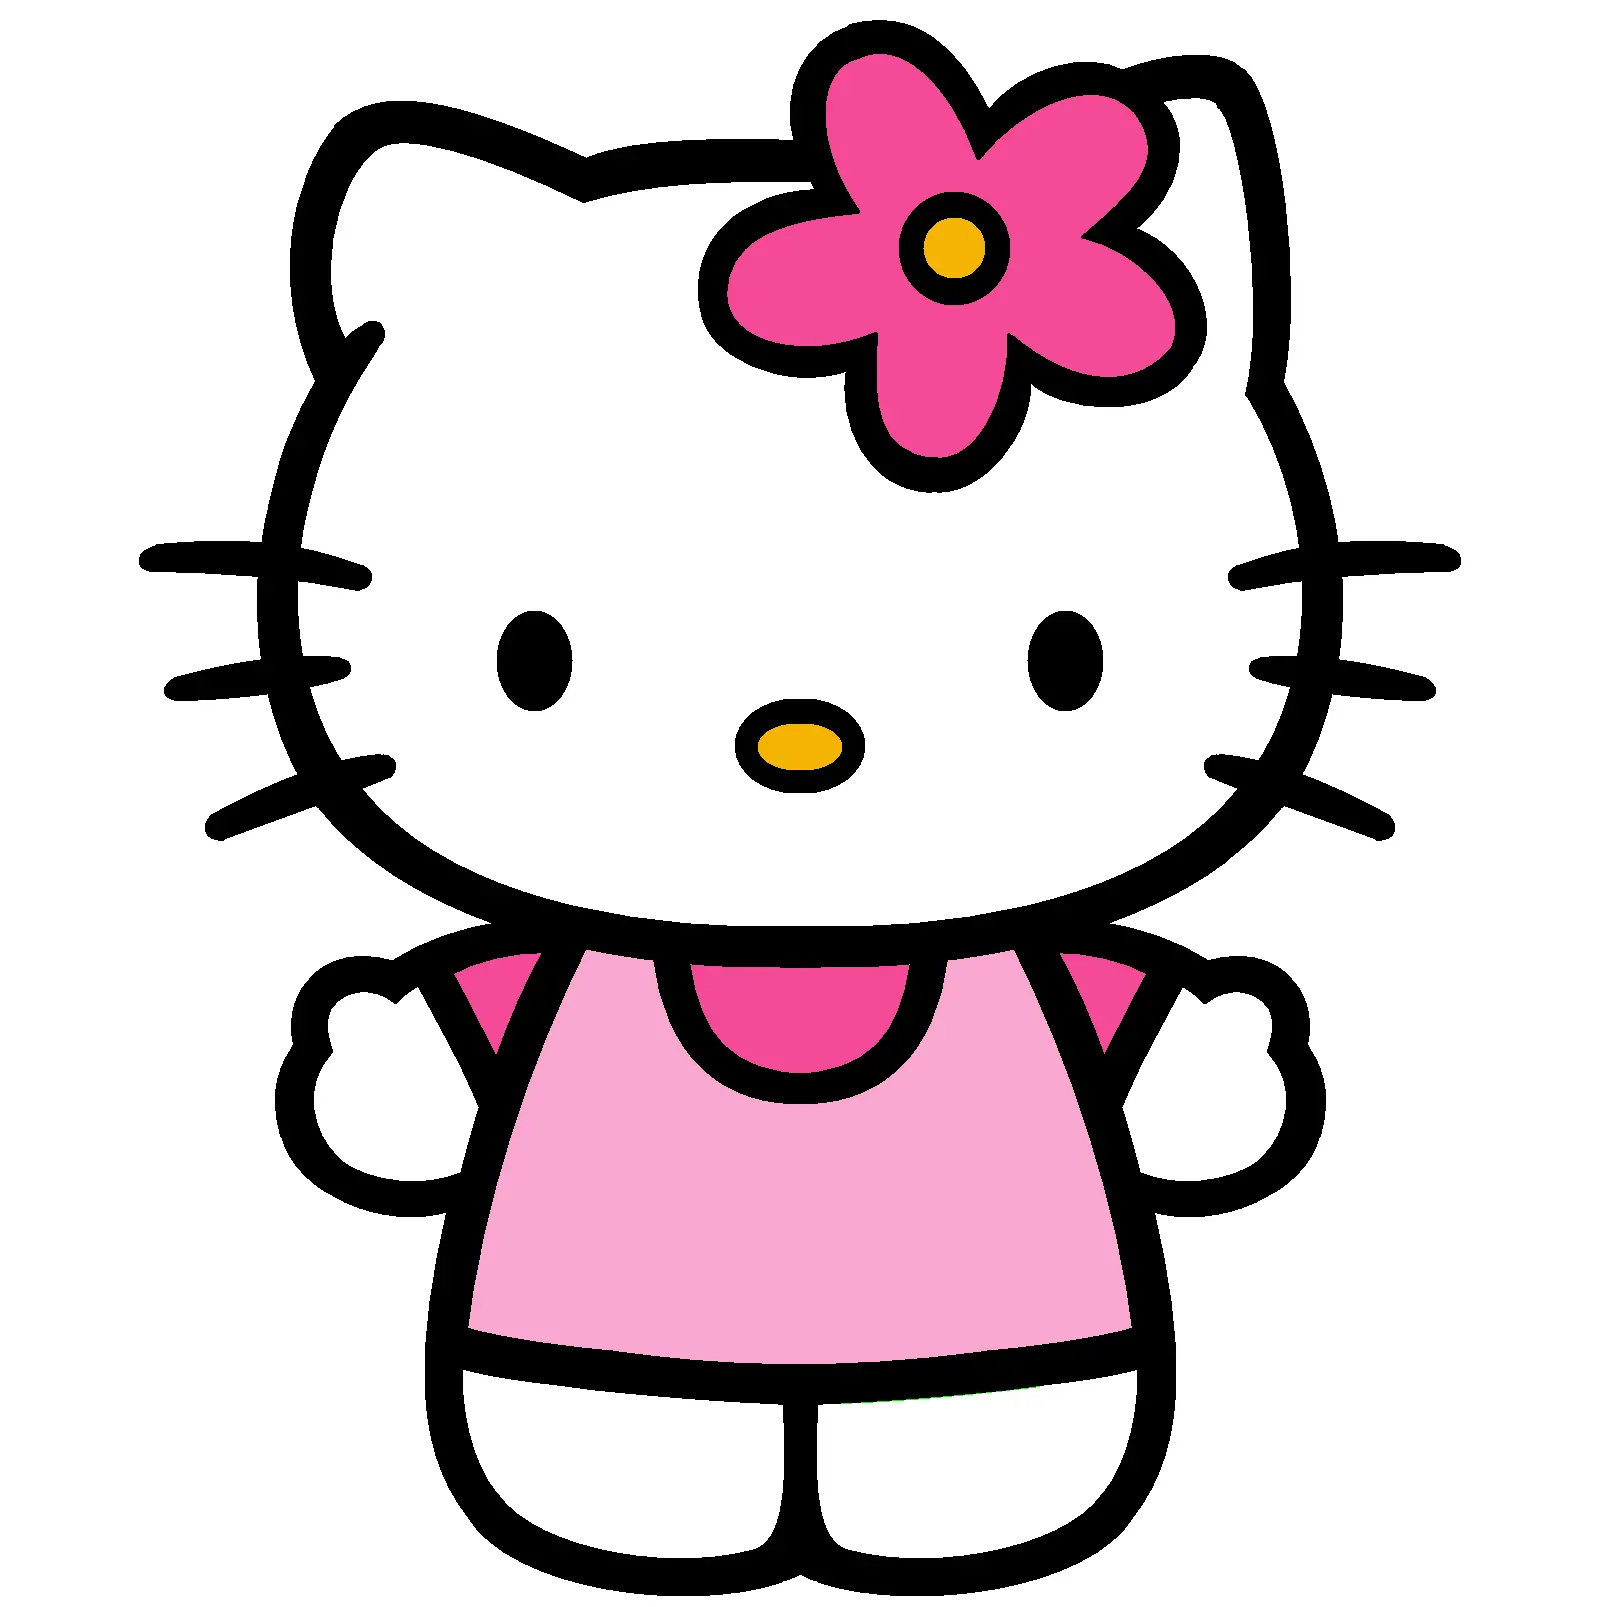 Hello Kitty Png